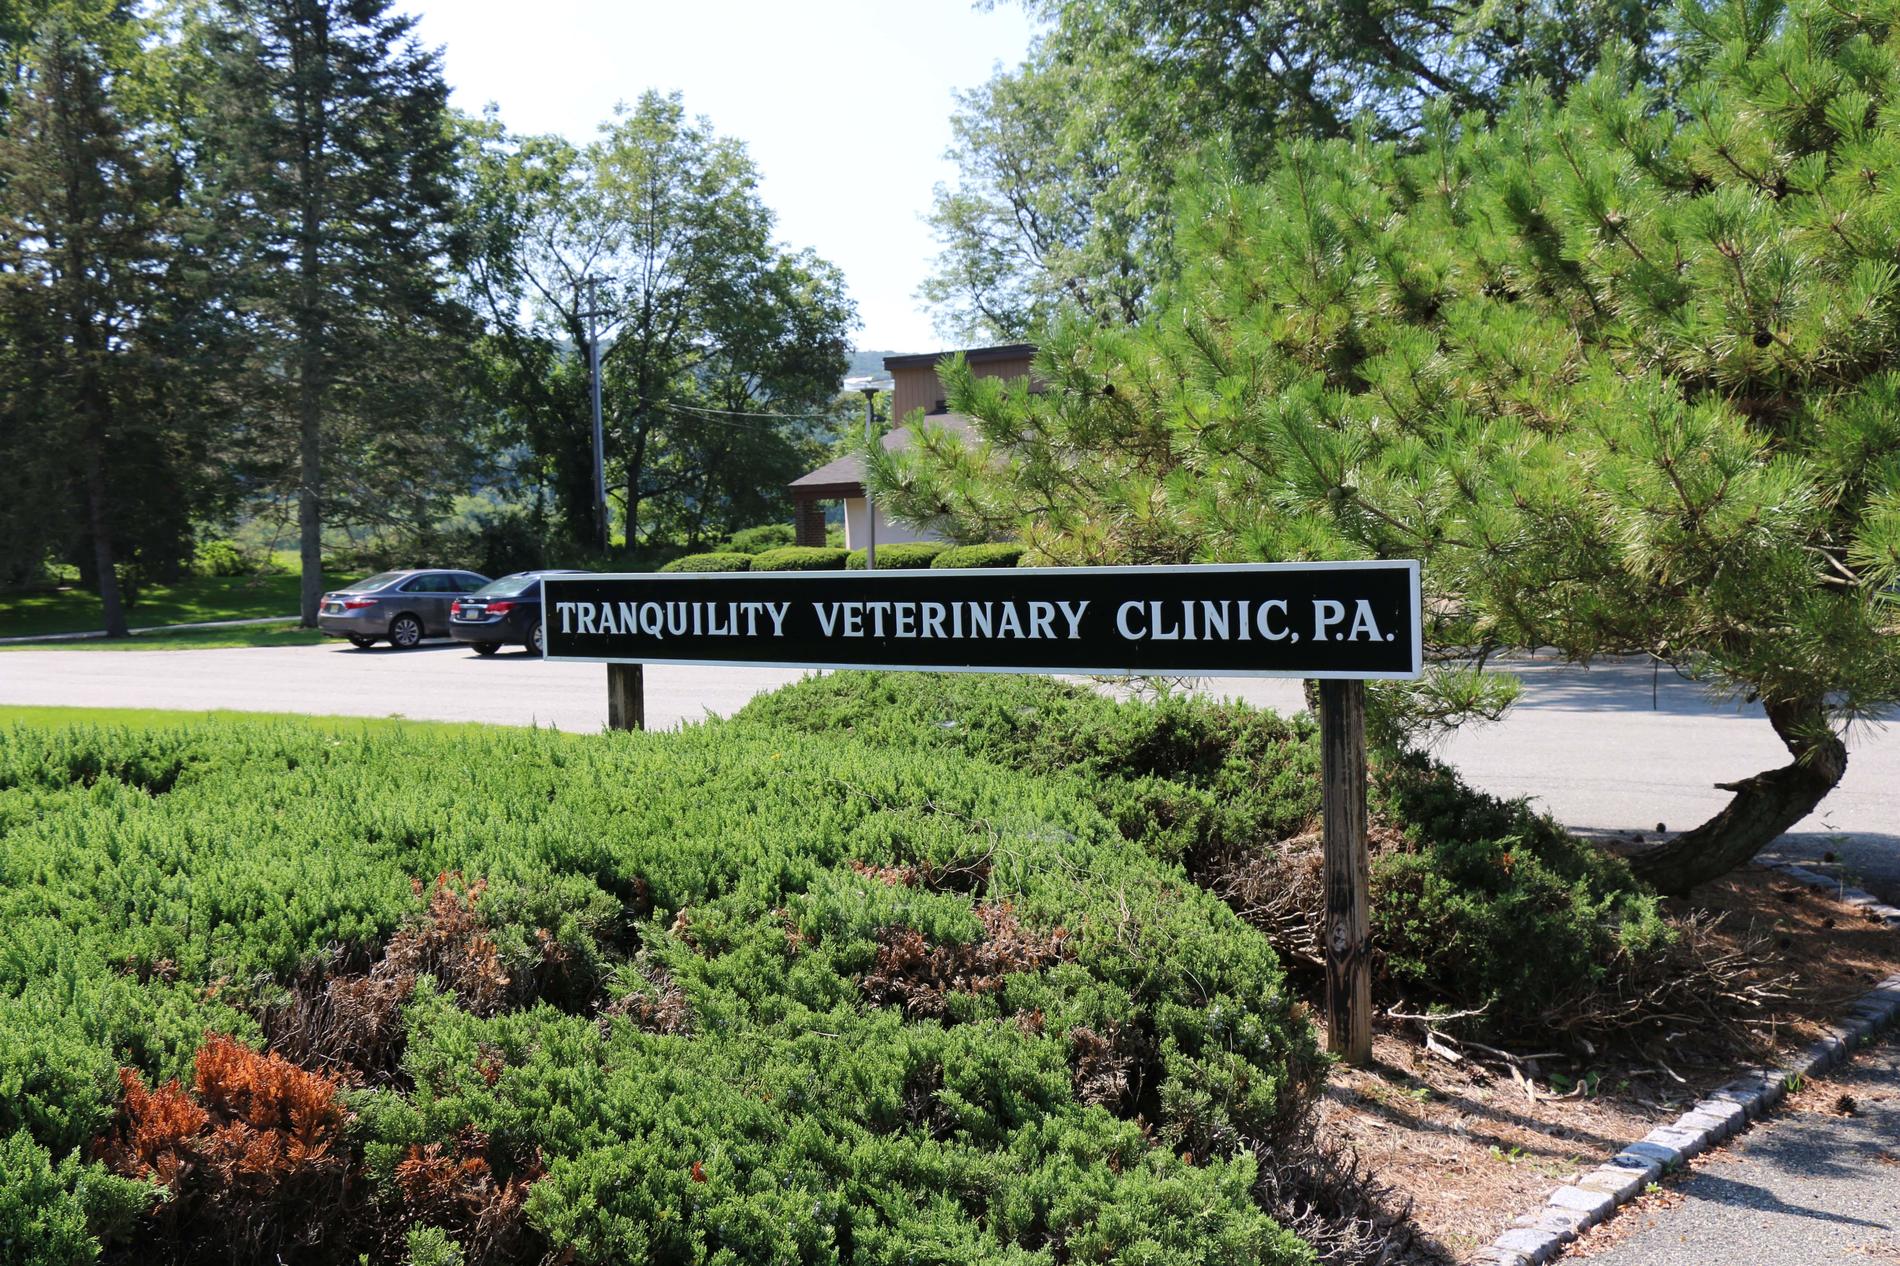 Tranquility Veterinary Clinic 17 Kennedy Rd, Tranquility New Jersey 07821